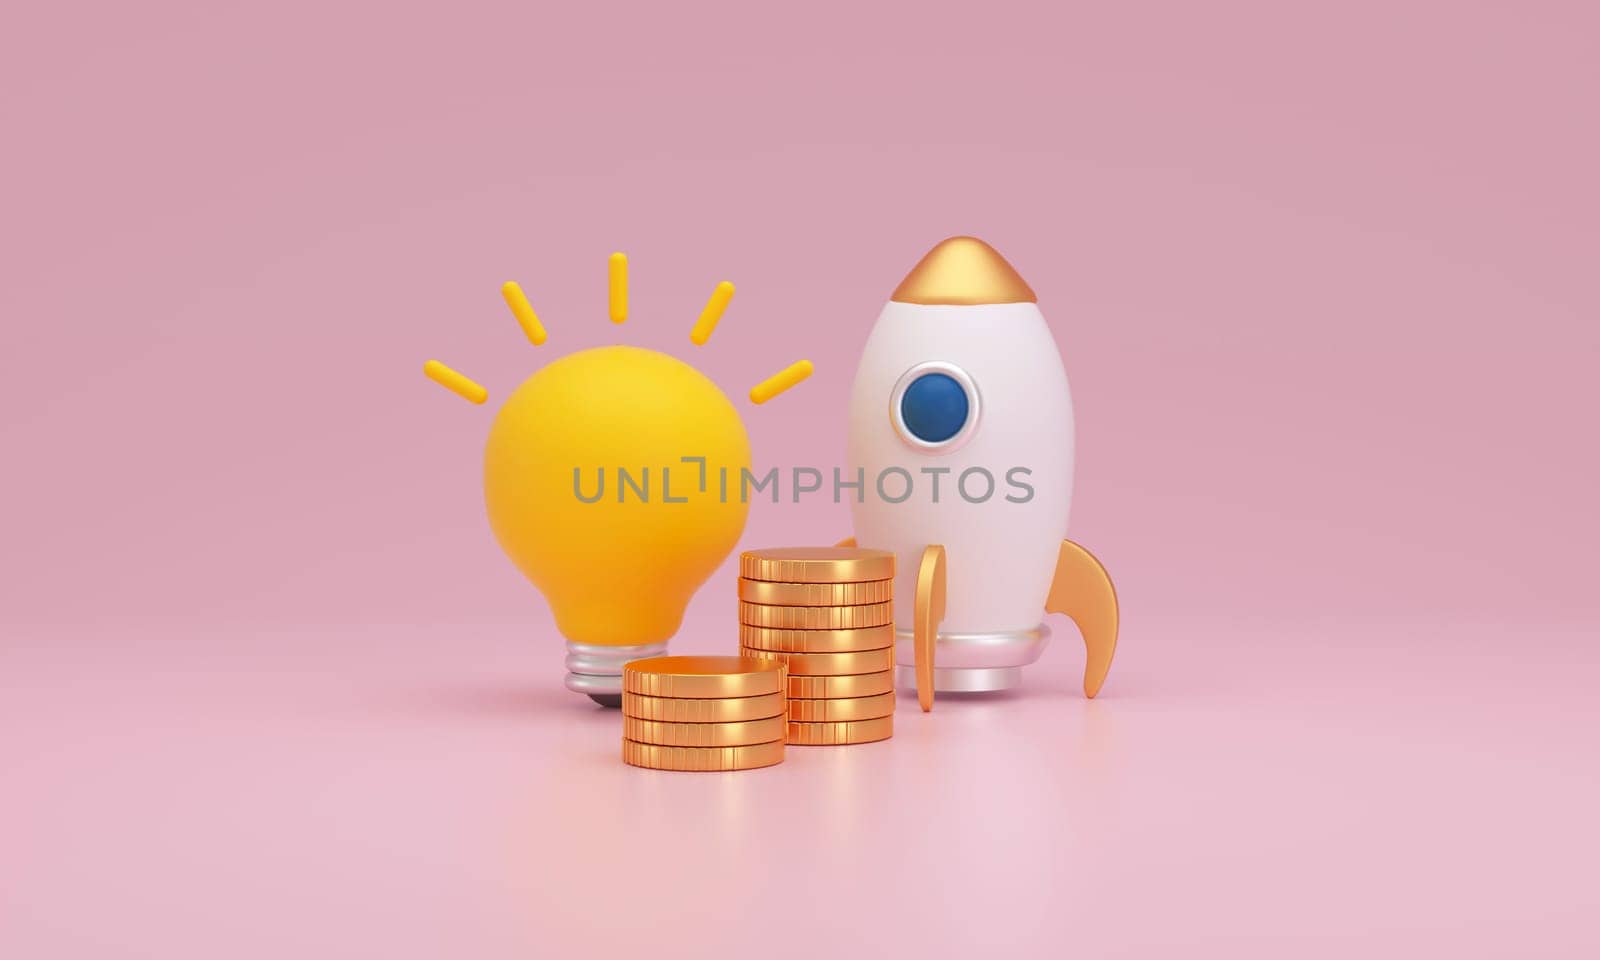 3D rendering showcasing a glowing yellow light bulb, a white and gold rocket, and stacks of gold coins, all set a pink background, symbolizing innovation, growth, and investment.